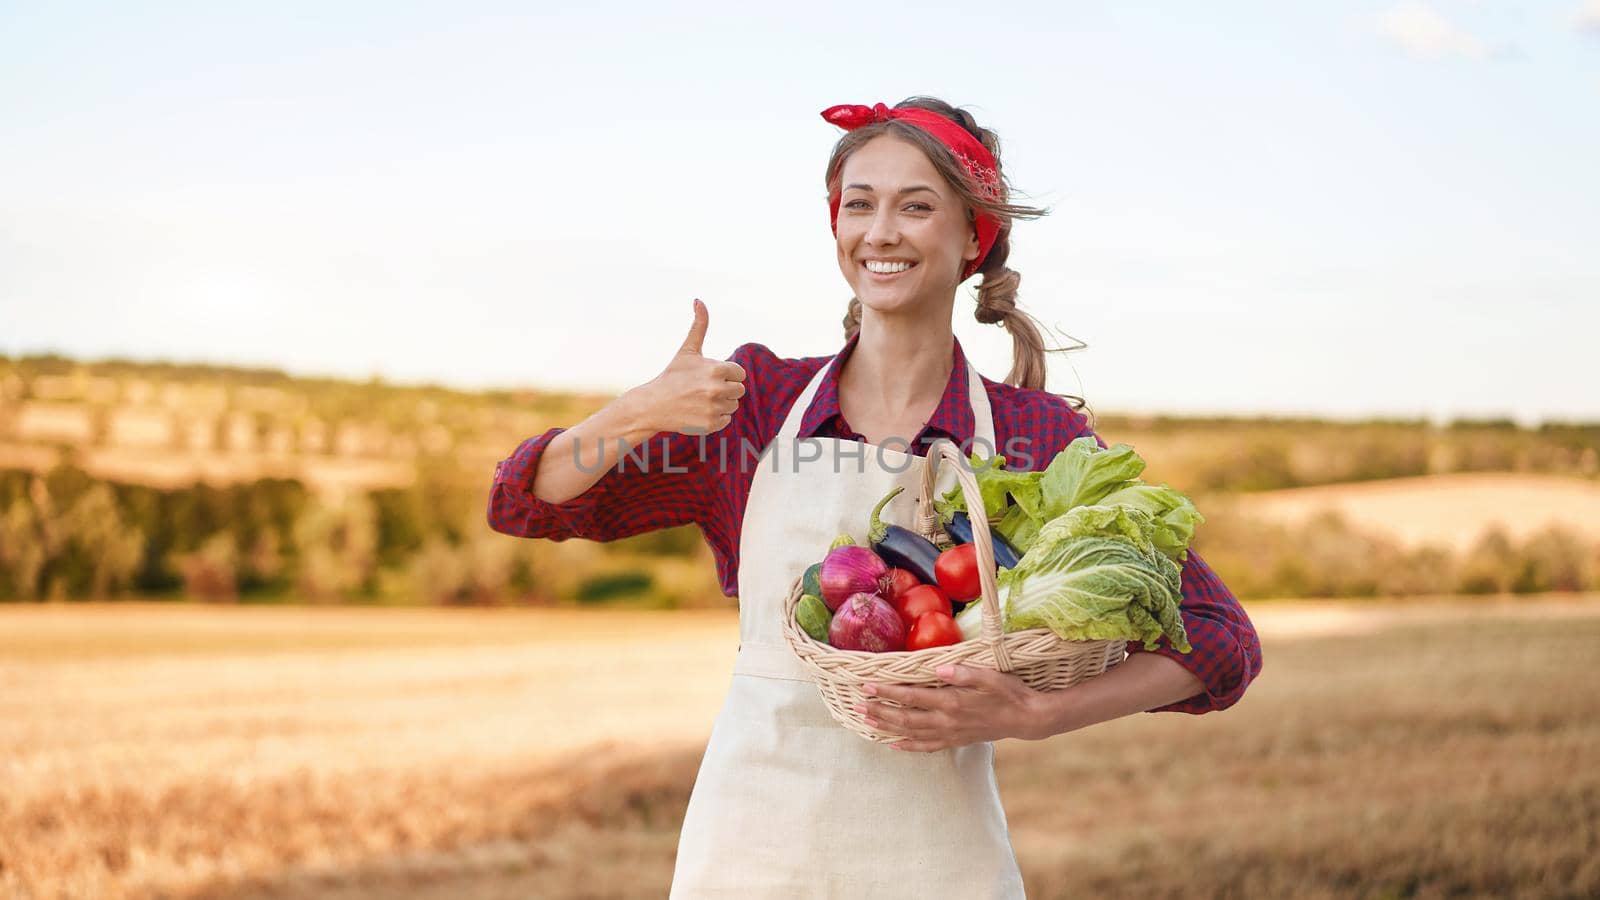 Woman farmer holding basket vegetable onion tomato salad cucumber showing thumb up standing farmland smiling Female agronomist specialist farming agribusiness Pretty girl dressed red checkered shirt